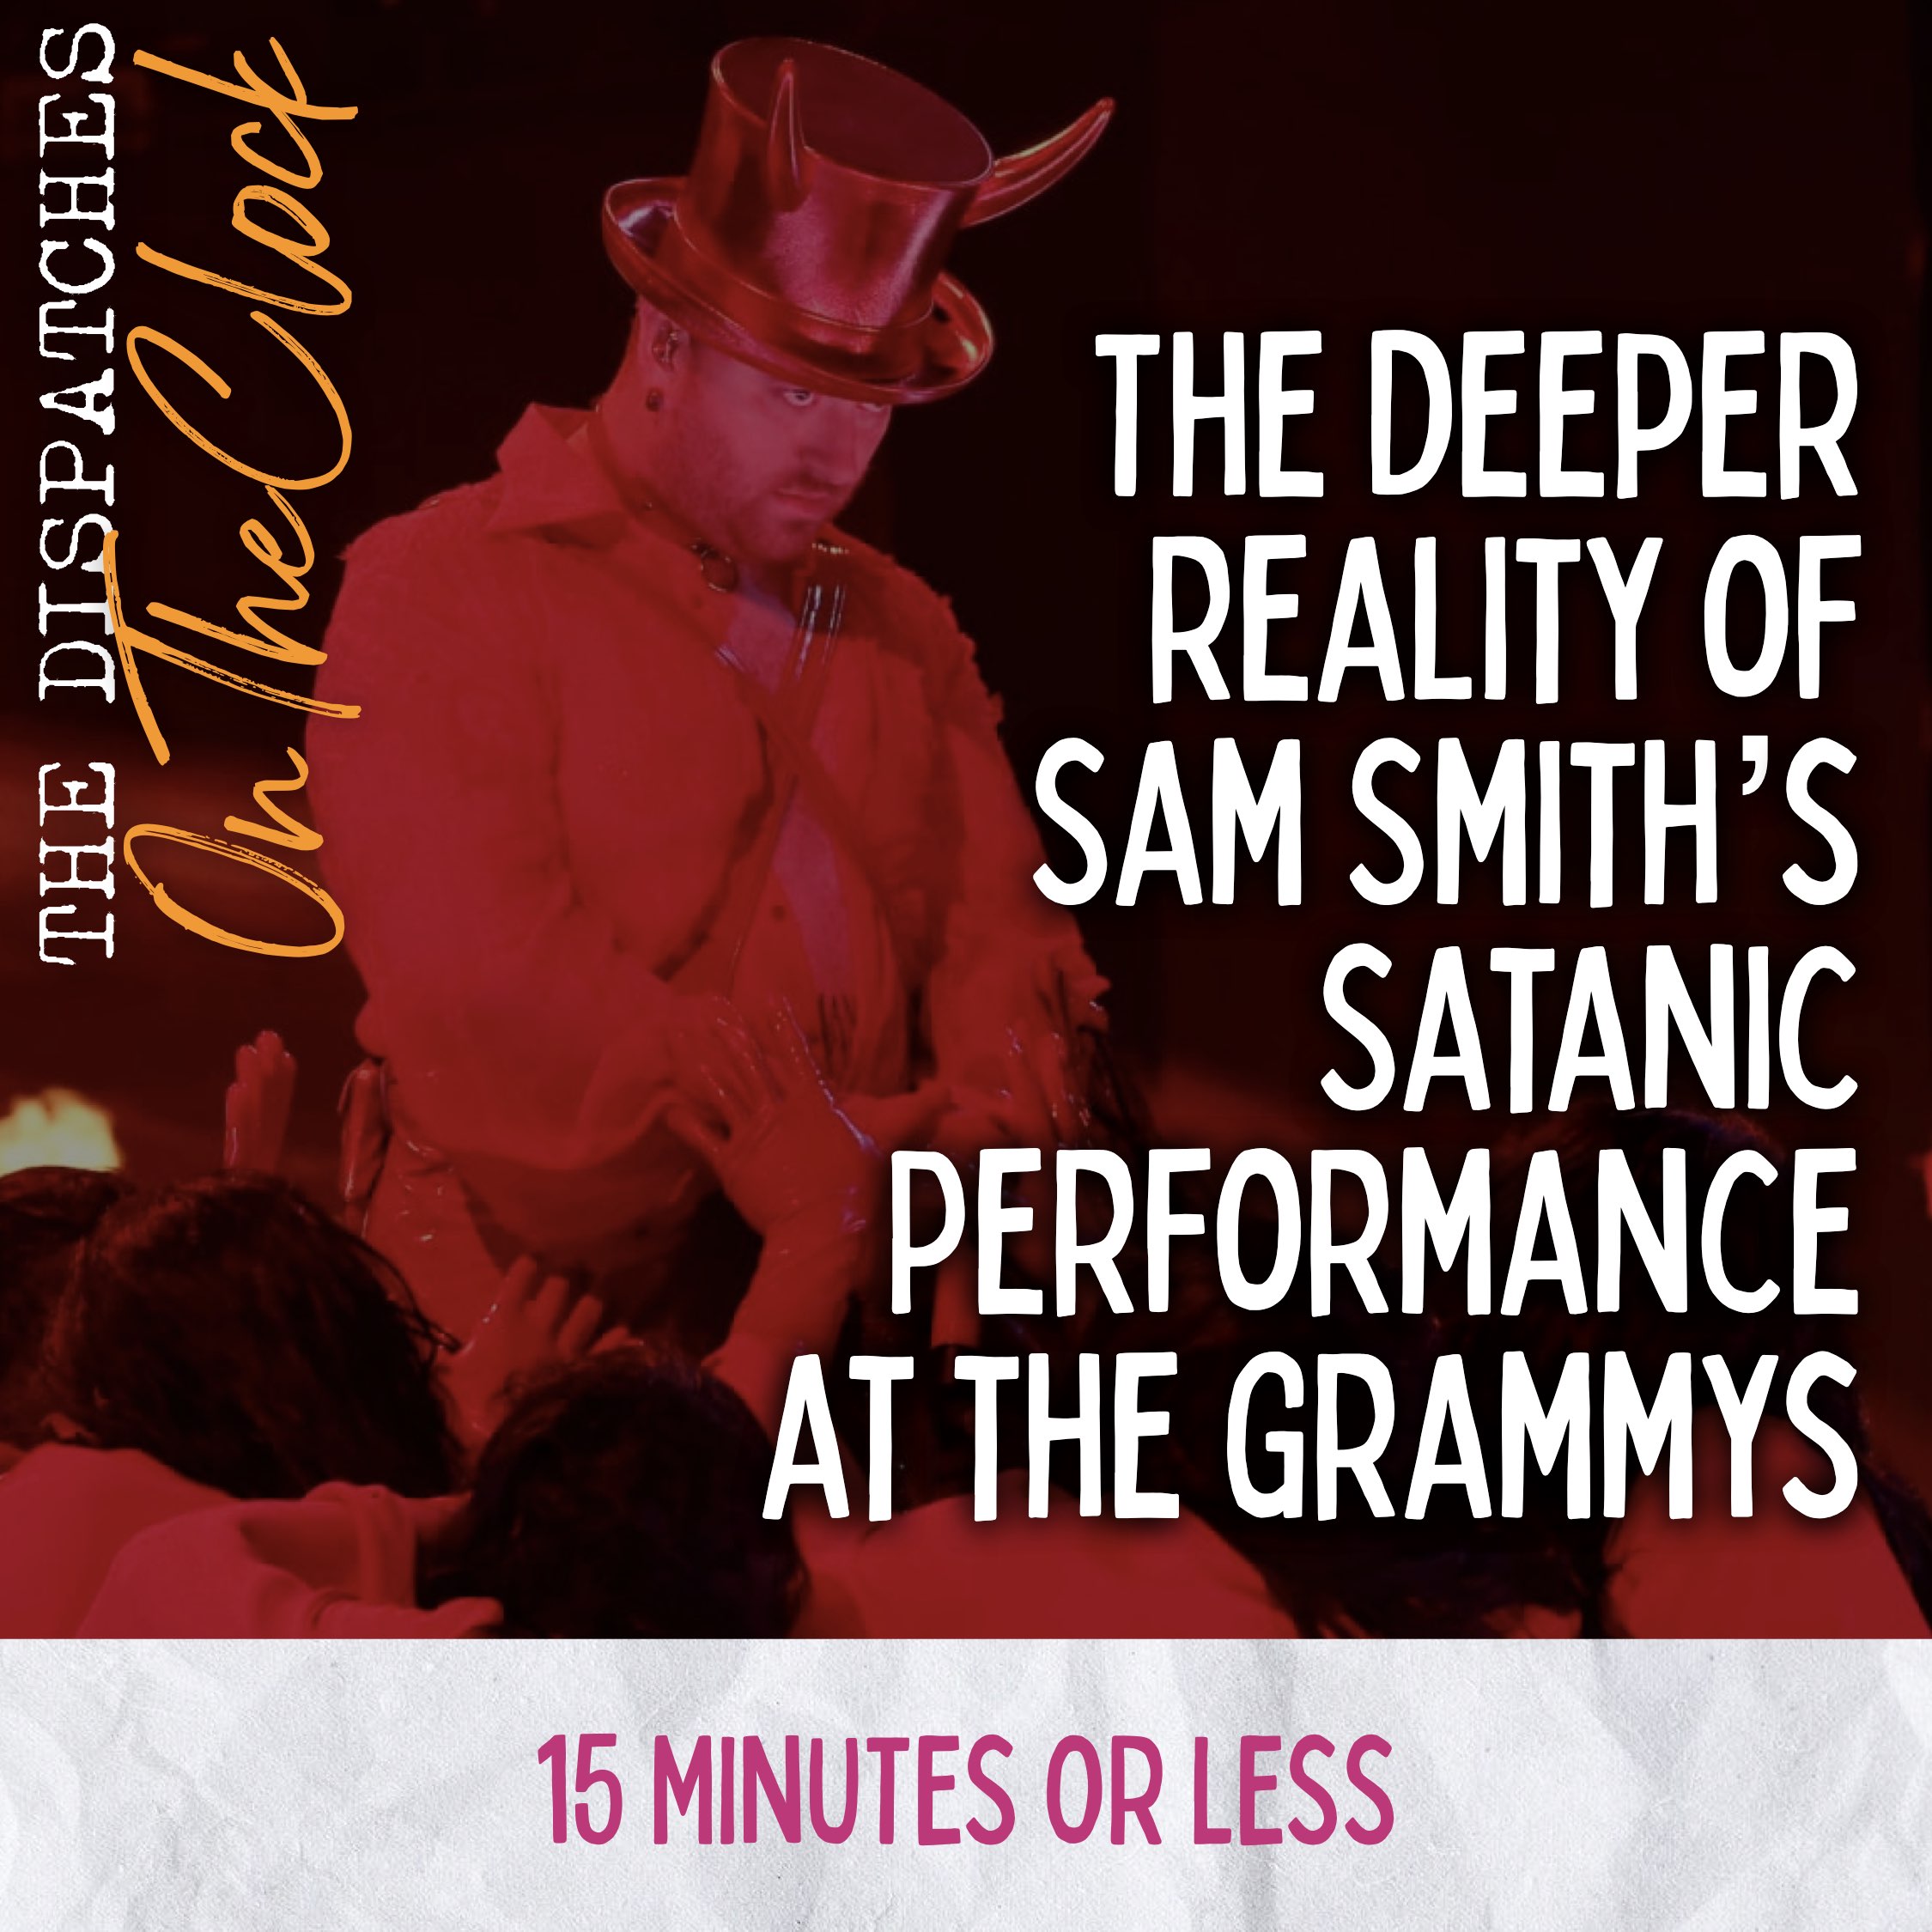 ON THE CLOCK | The Sacramental Significance of Sam Smith’s Satanic Performance at the Grammys